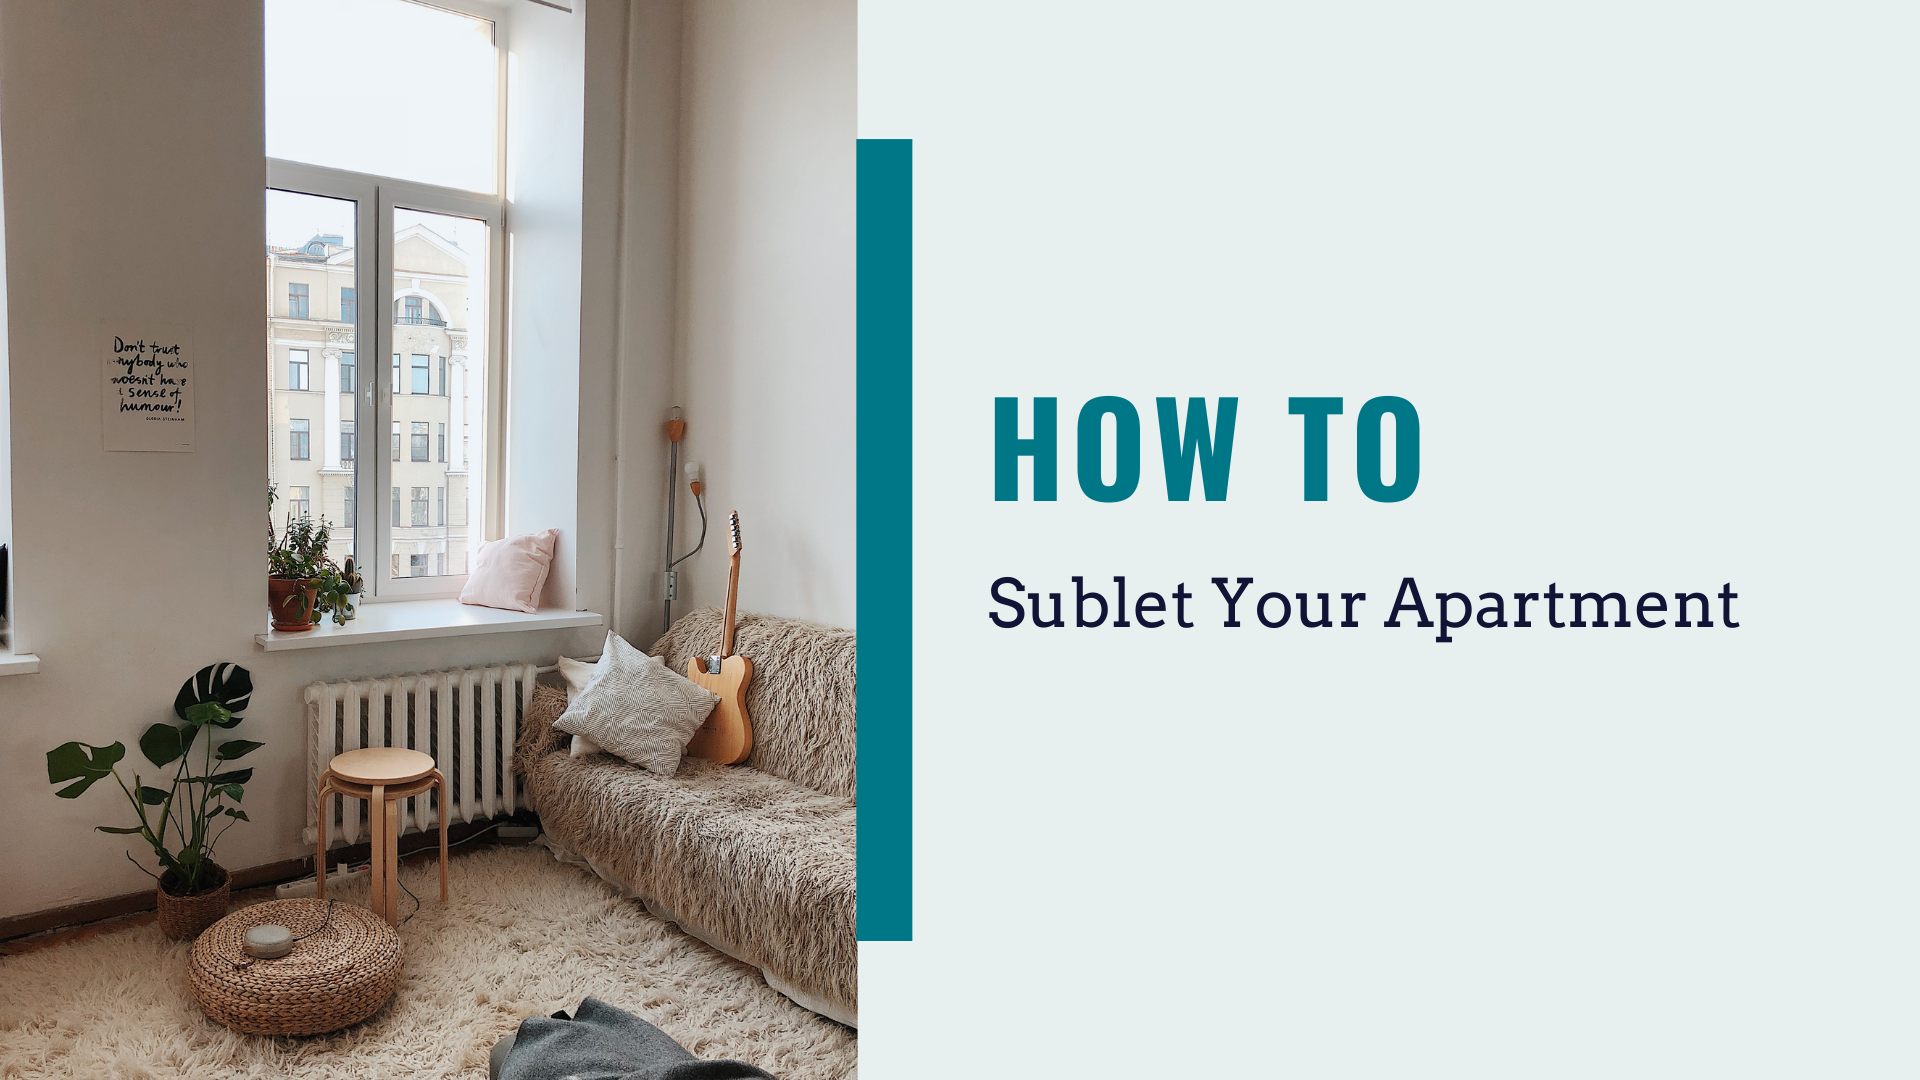 How to Sublet Your Apartment Feature Image